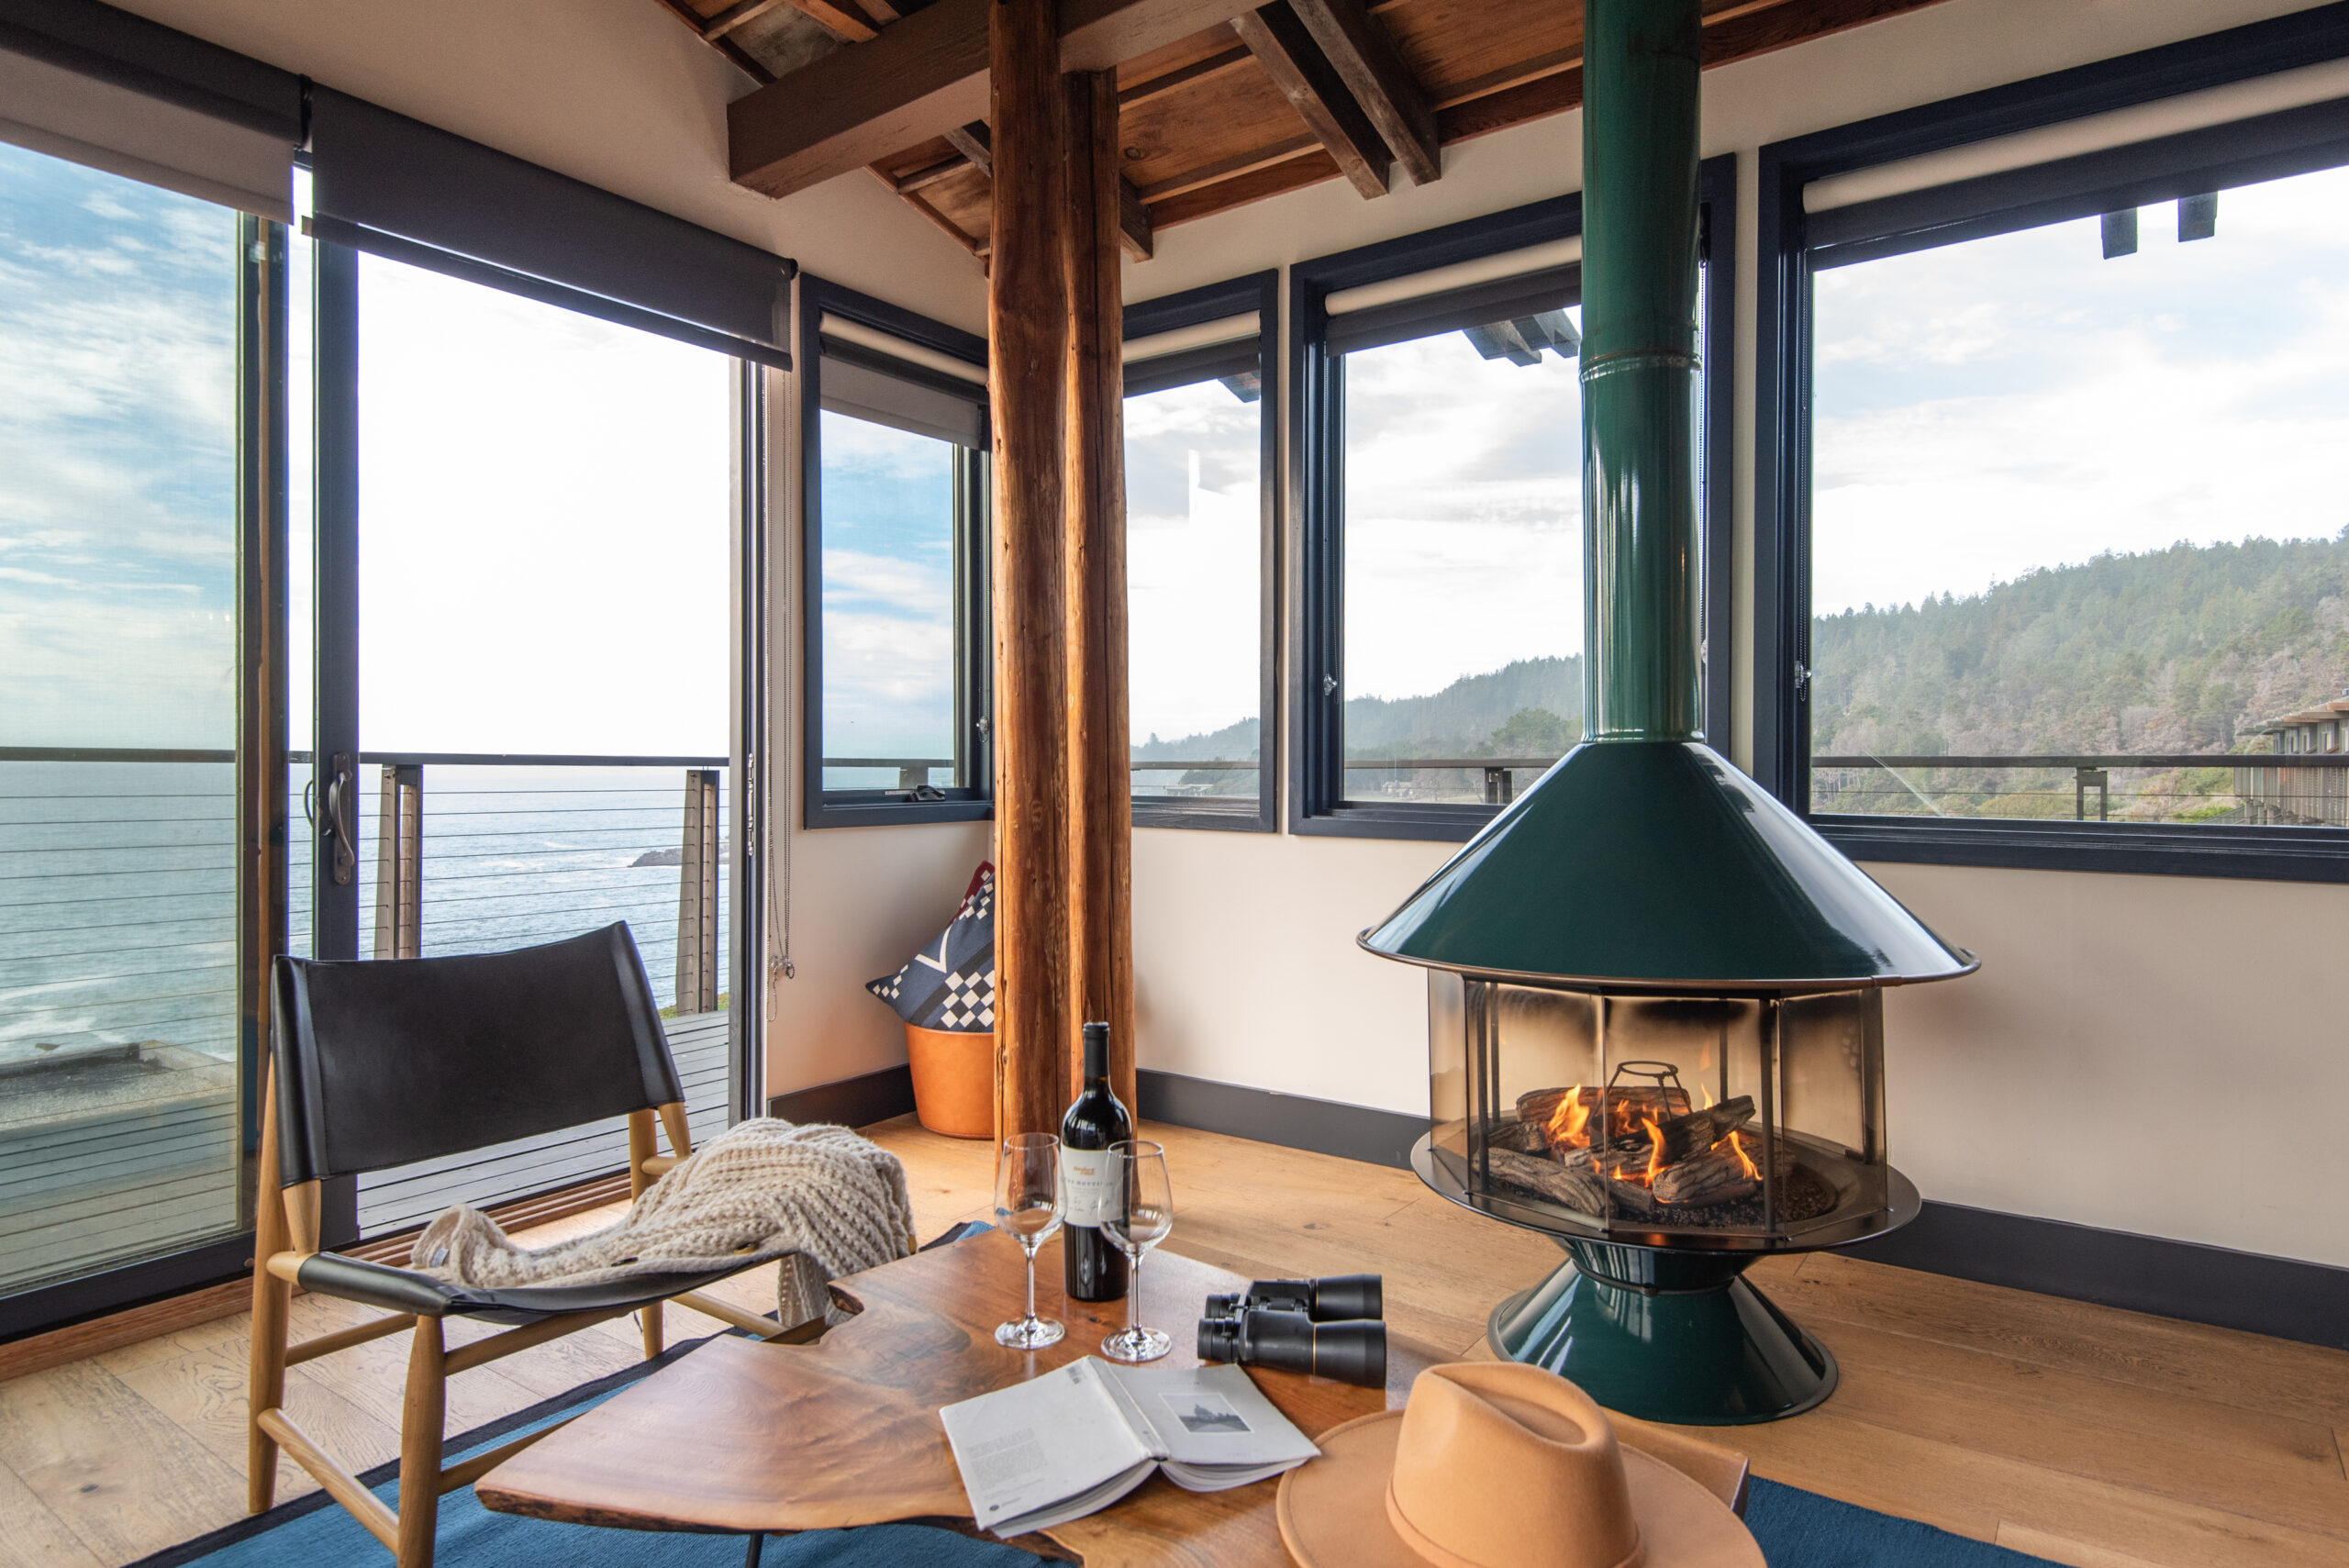 A vintage fireplace with a view at Jenner's Timber Cove Resort. (Timber Cove Resort)